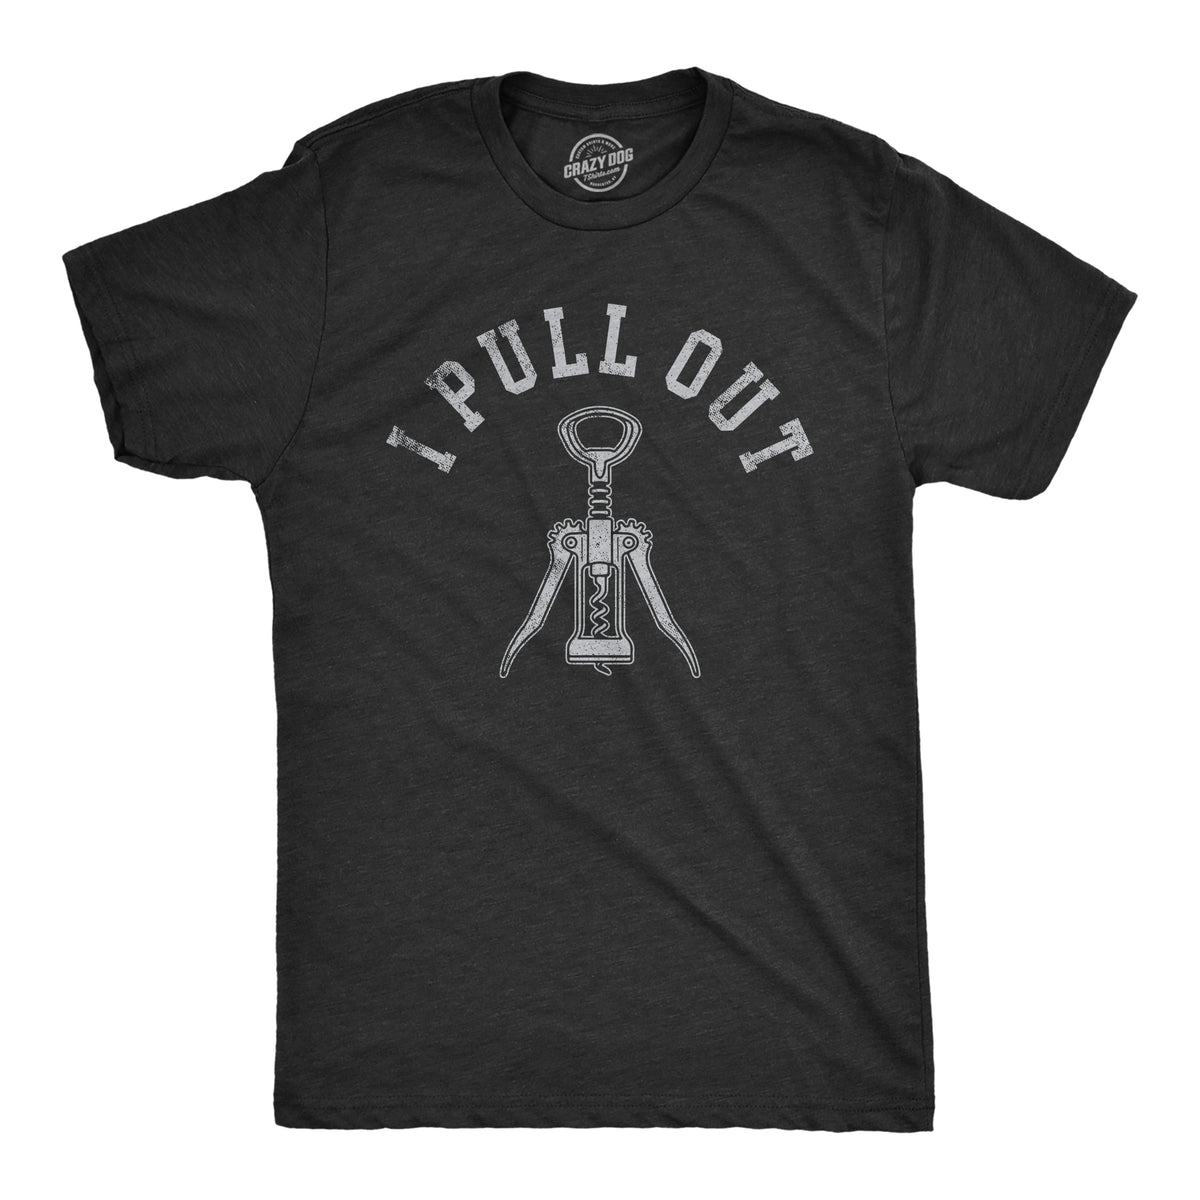 Funny Heather Black - PULLOUT I Pull Out Mens T Shirt Nerdy Wine sex Tee